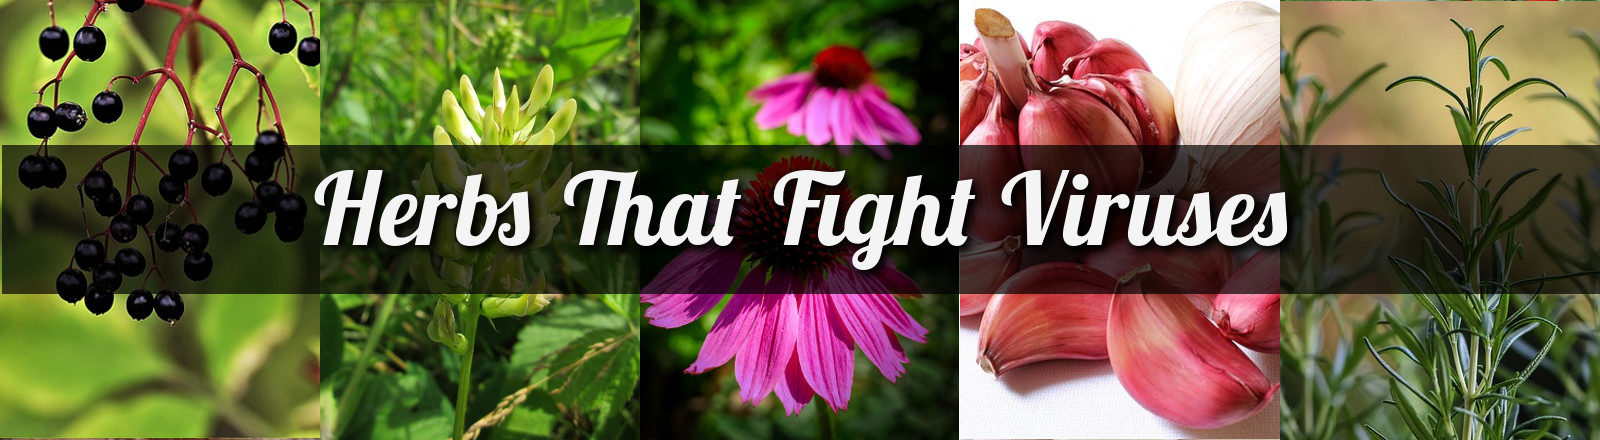 Herbs That Fight Viruses - article by NewsMax